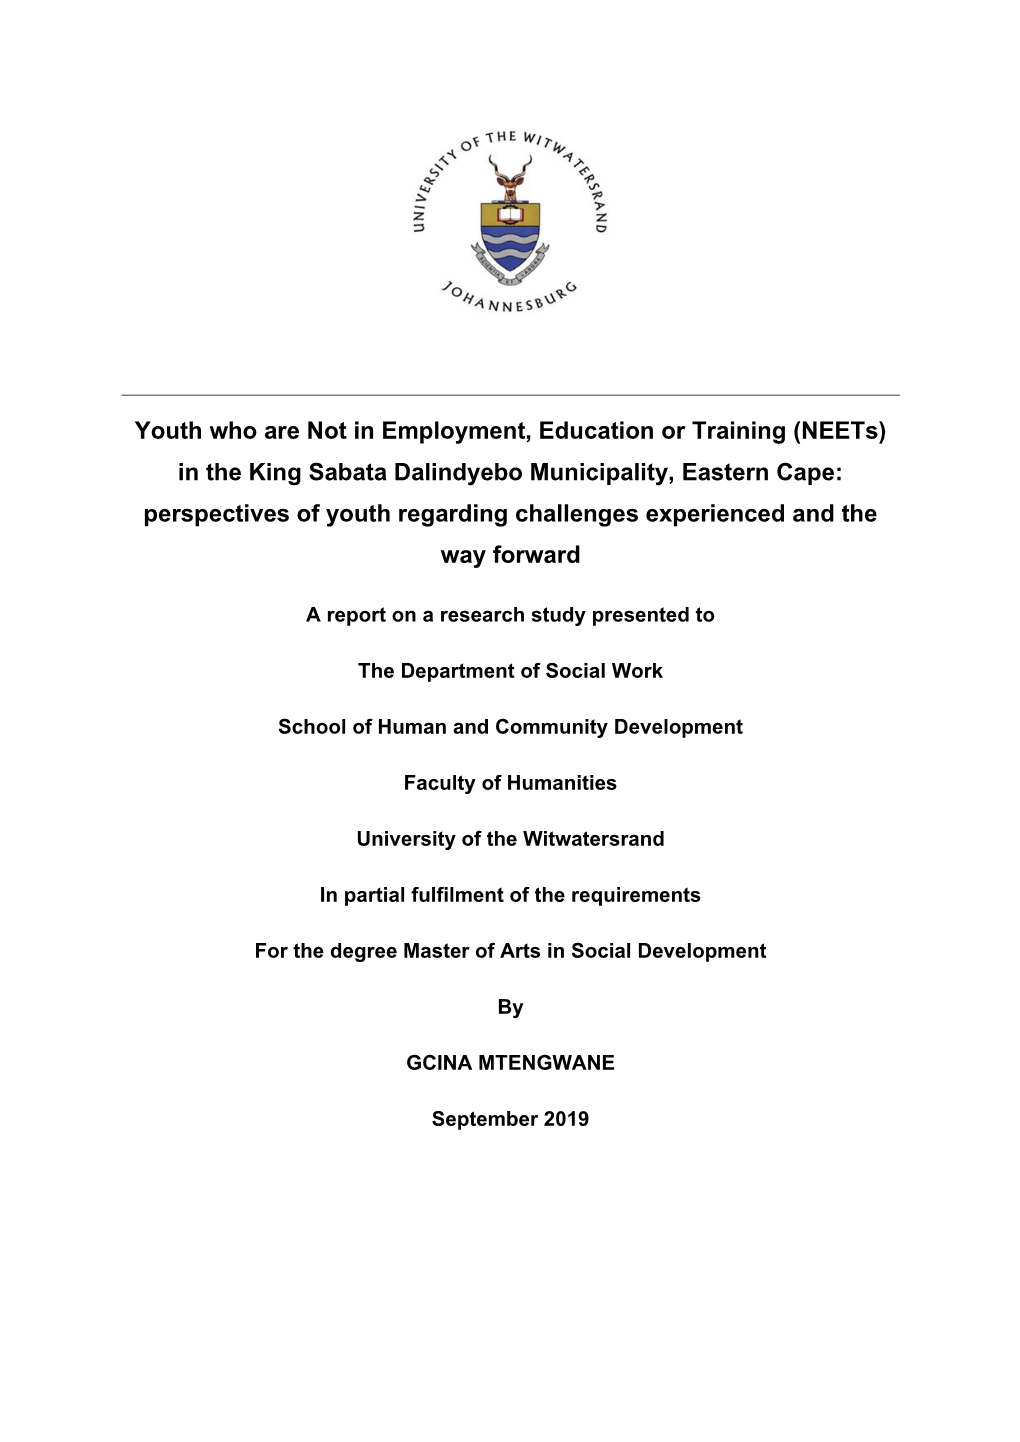 Youth Who Are Not in Employment, Education Or Training (Neets) in the King Sabata Dalindyebo Municipality, Eastern Cape: Perspec